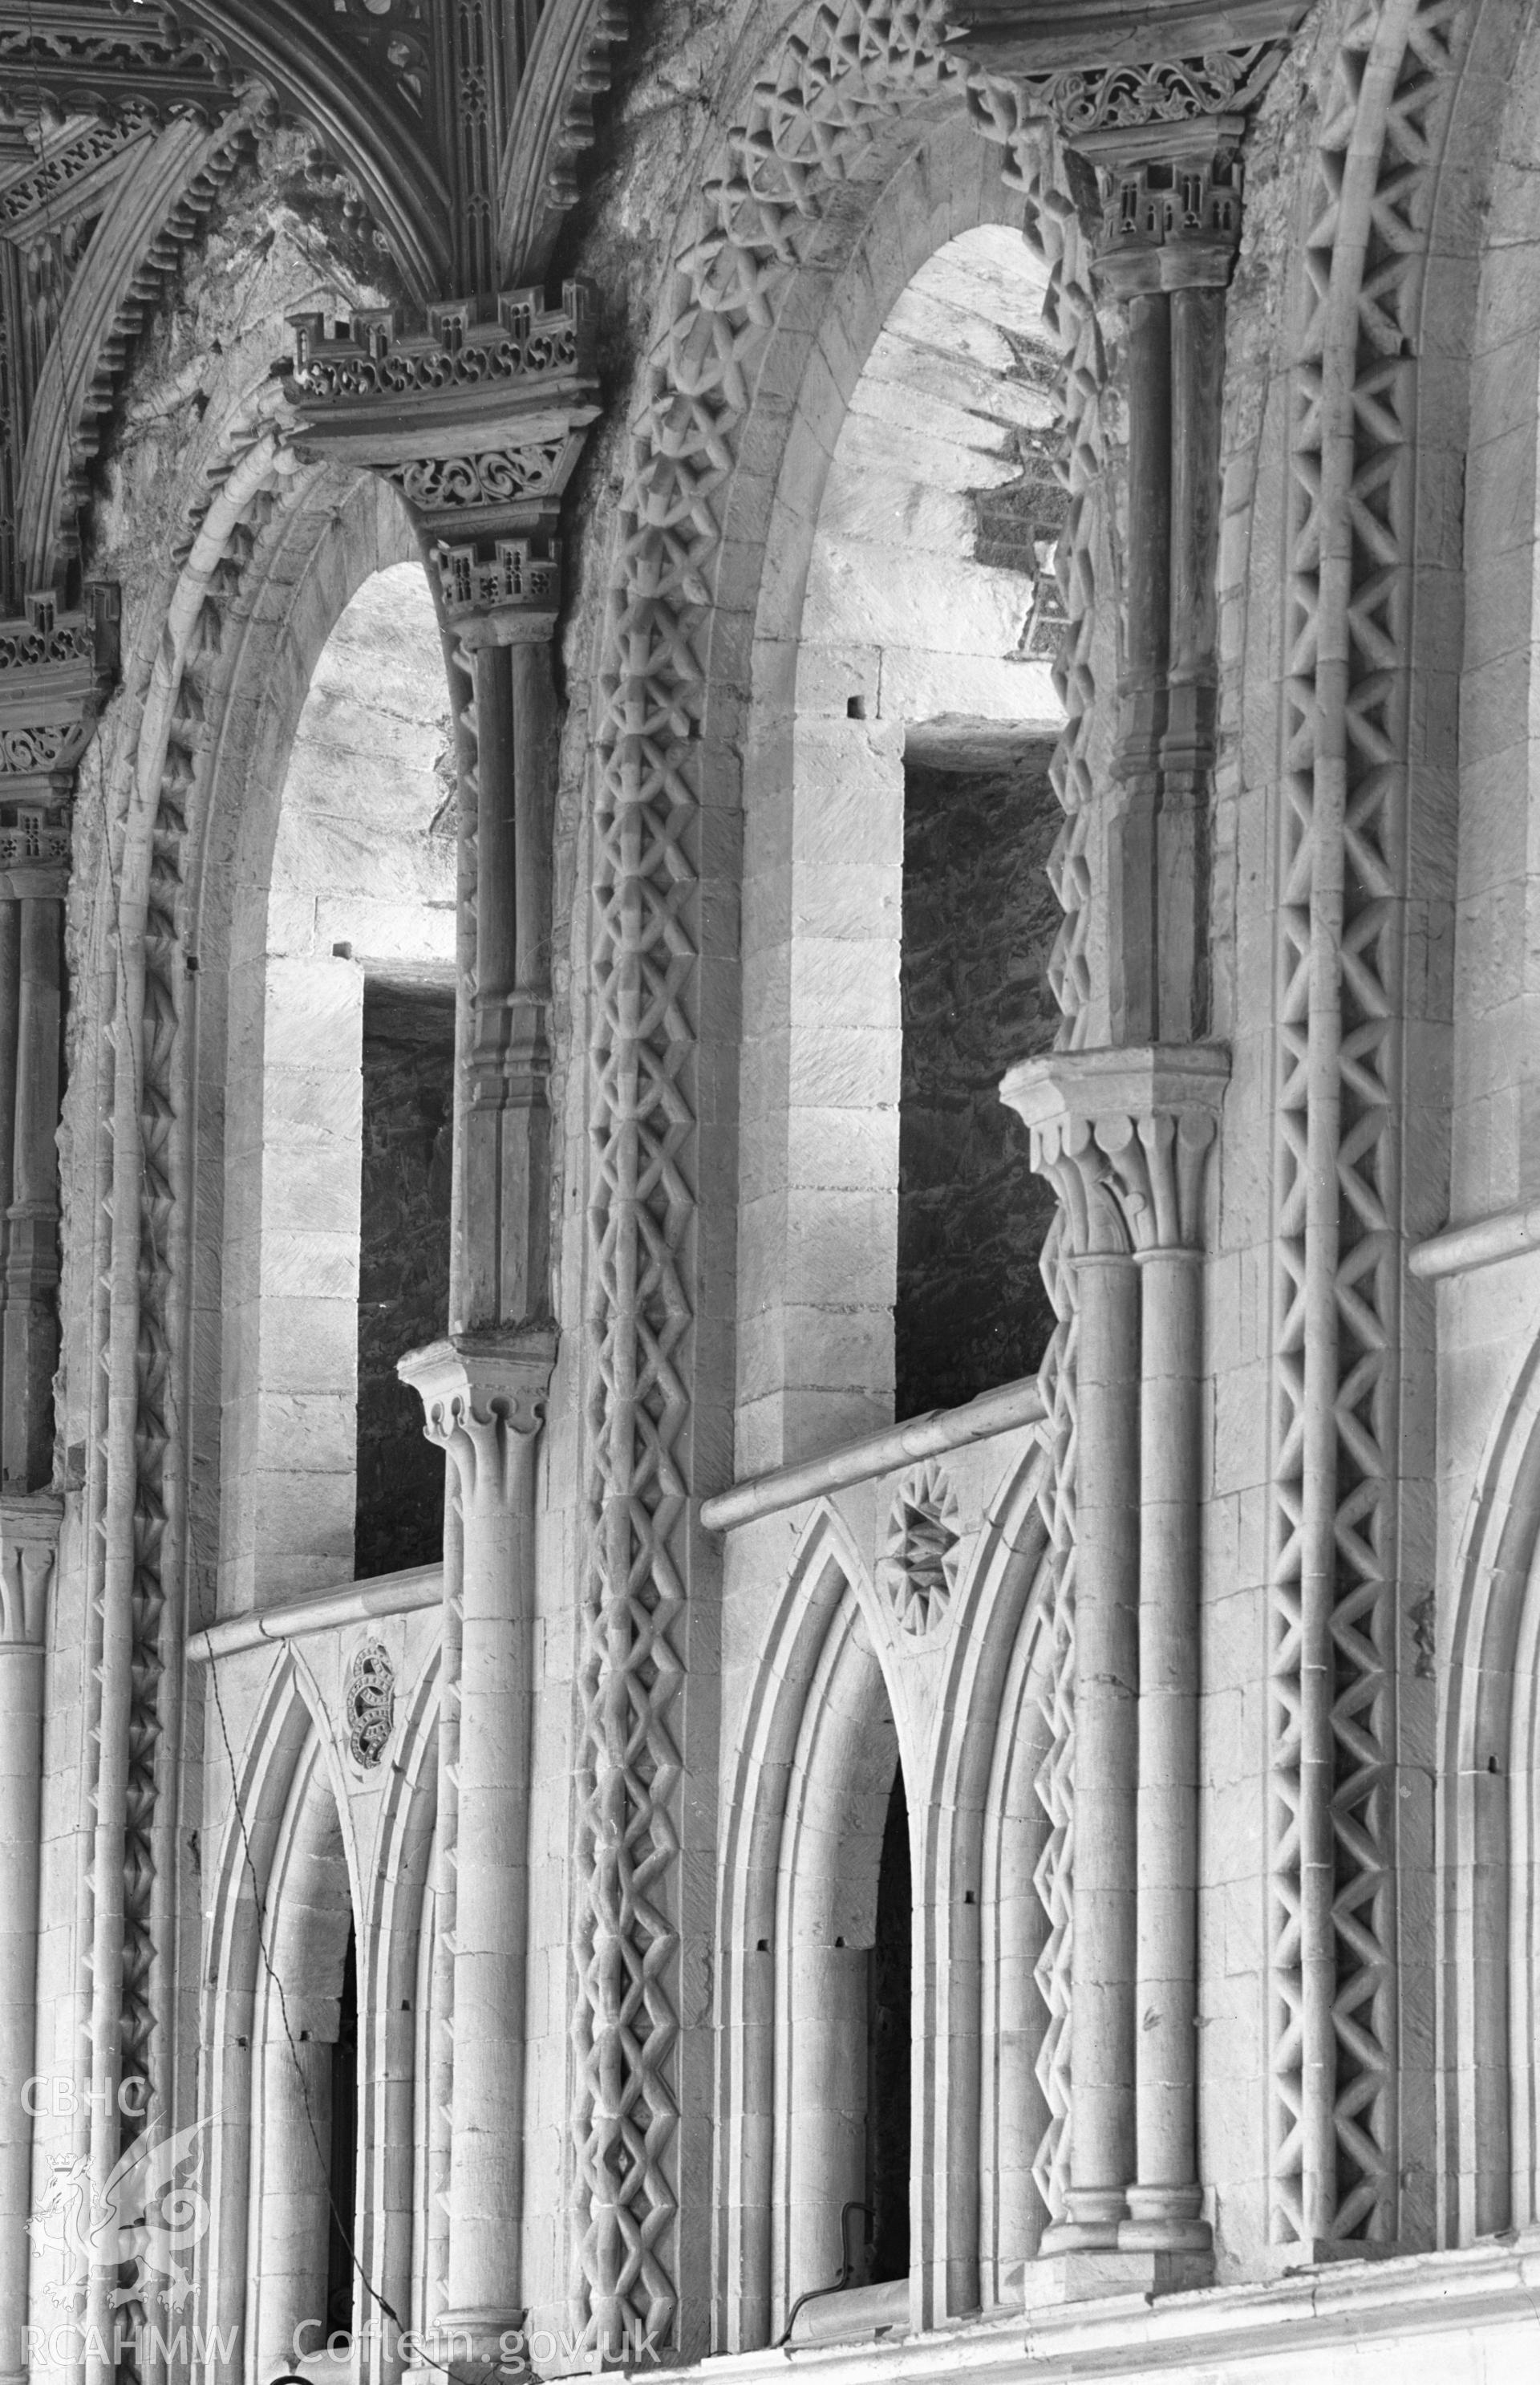 Digital copy of a black and white nitrate negative showing interior stonework decoration at St. David's Cathedral, taken by E.W. Lovegrove, July 1936.